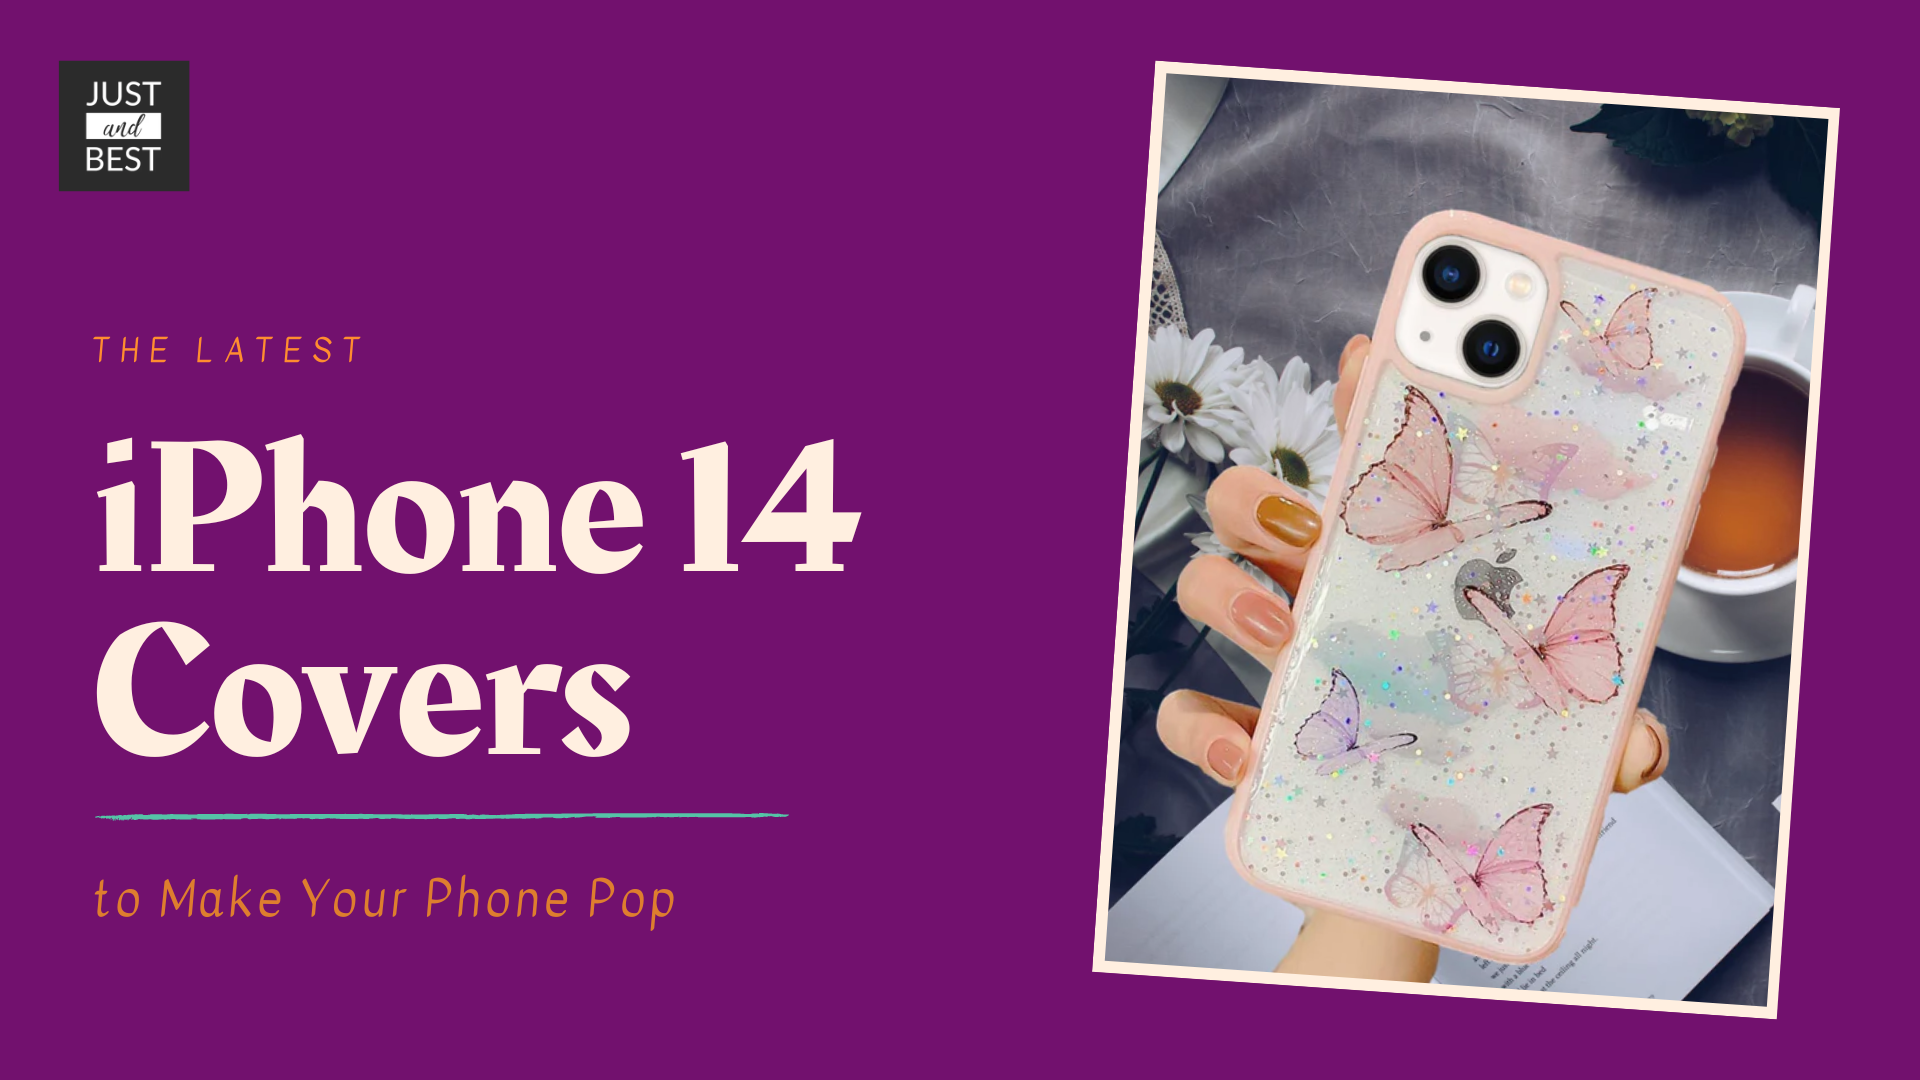 iPhones 14 Covers